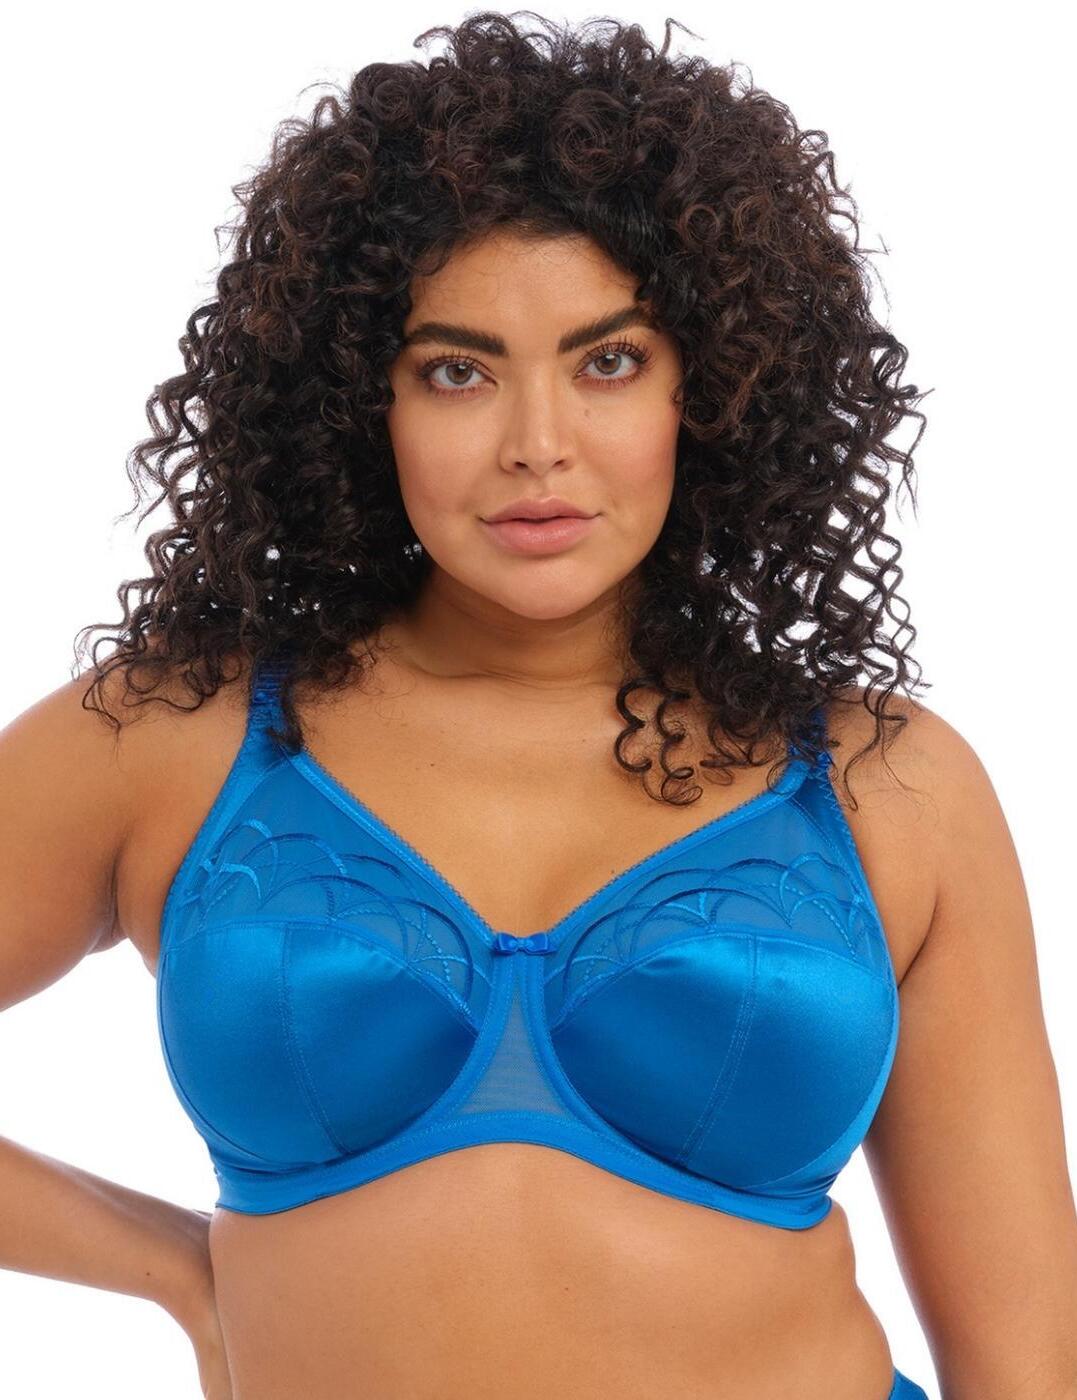 Elomi Cate Underwire Full Cup Banded Bra 4030 UNITED KINGDOM size